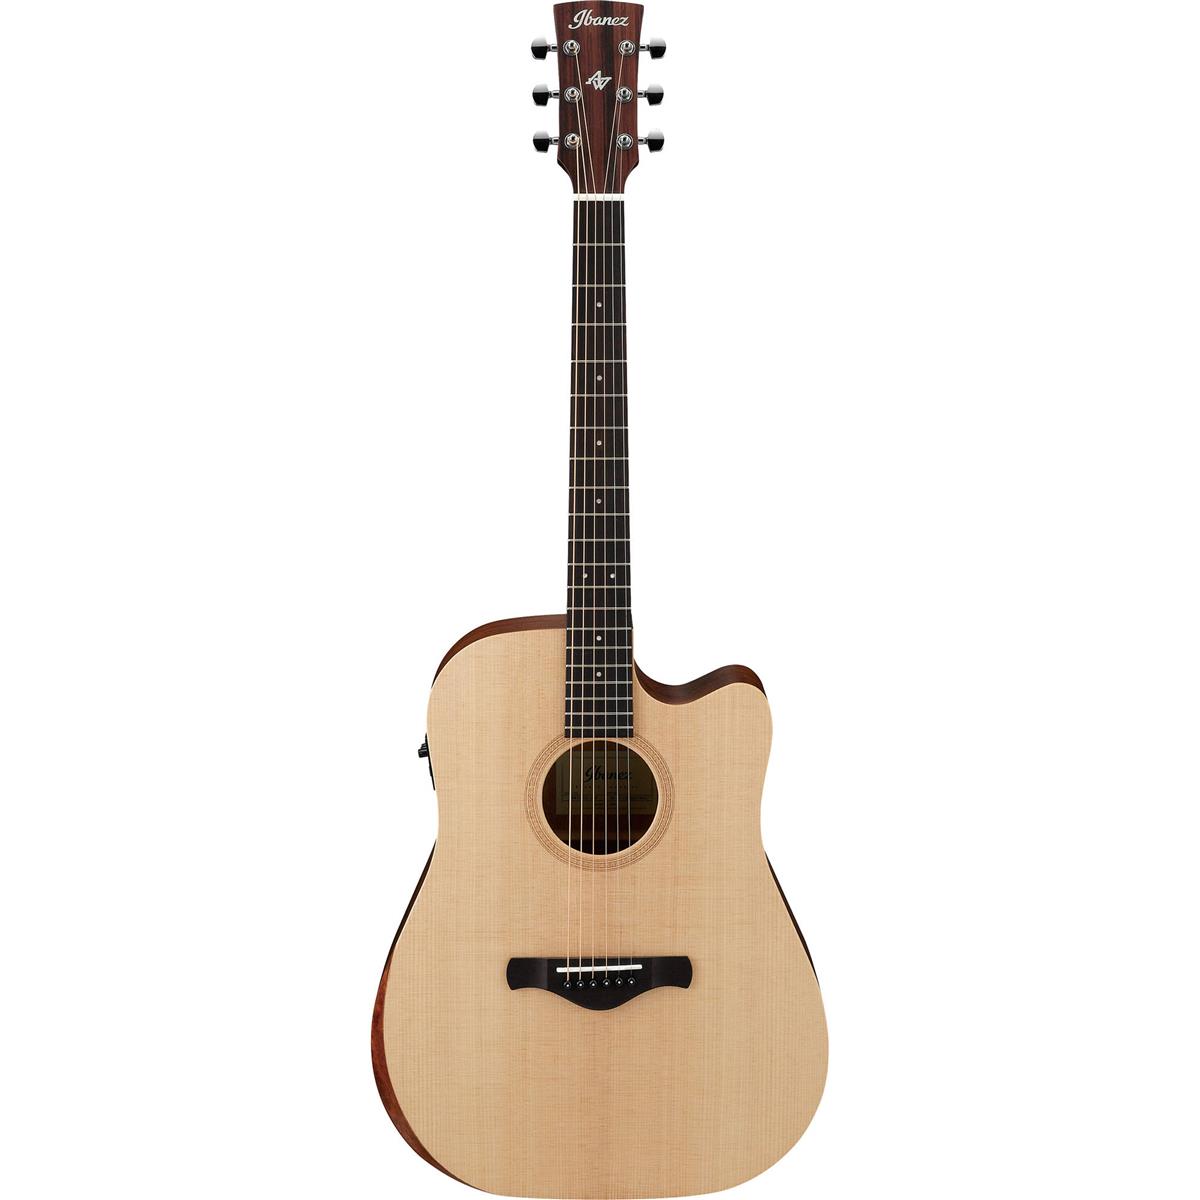 Ibanez Artwood AW150CE Acoustic Guitar - Open Pore Natural